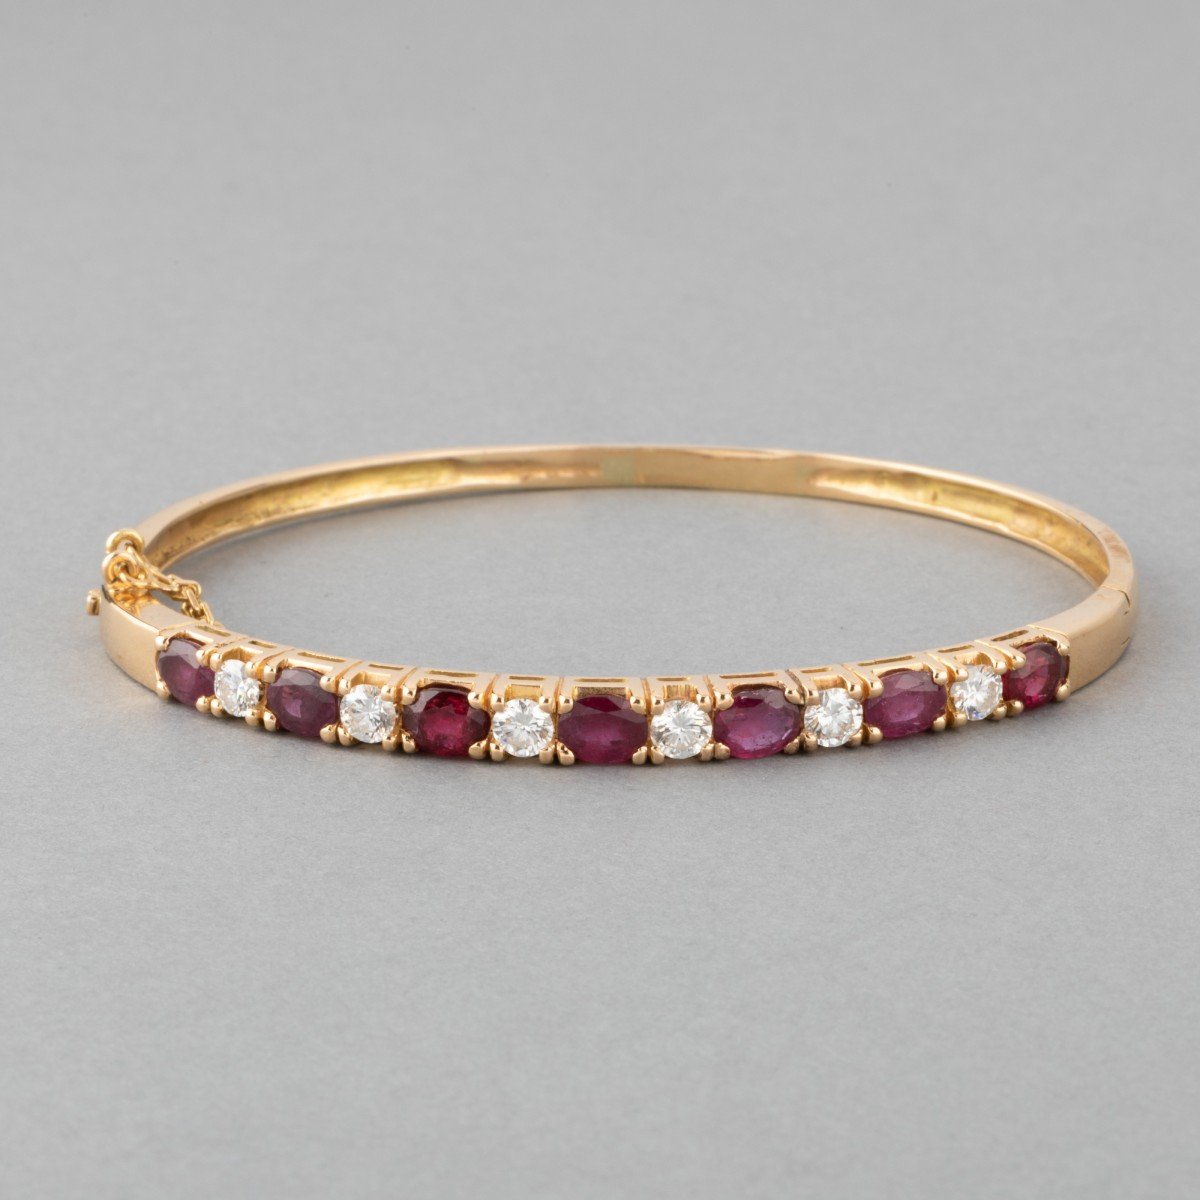 Vintage Bracelet In Gold Diamonds And Rubies-photo-2